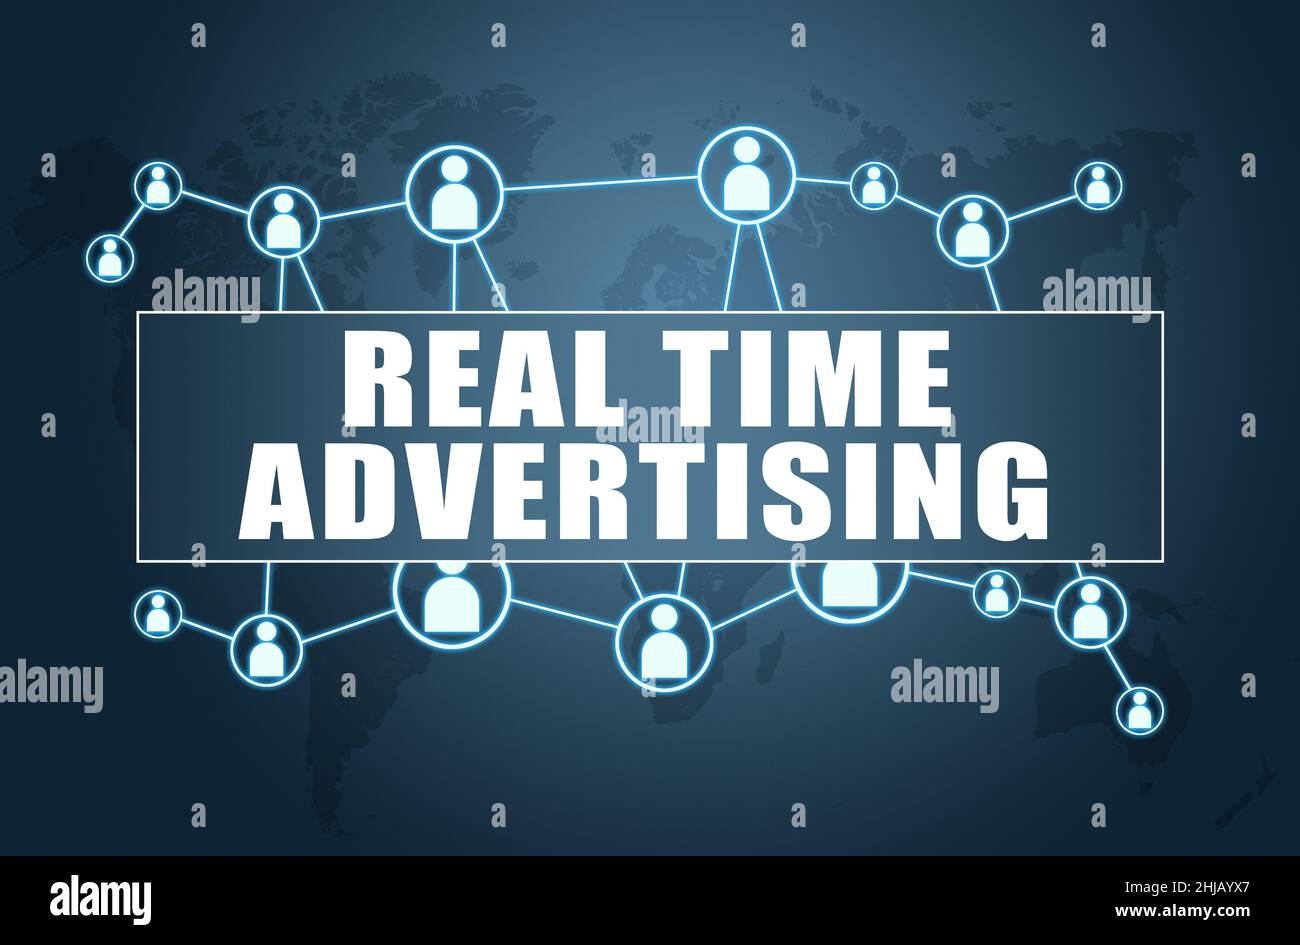 Real Time Advertising - text concept on blue background with world map and social icons. Stock Photo